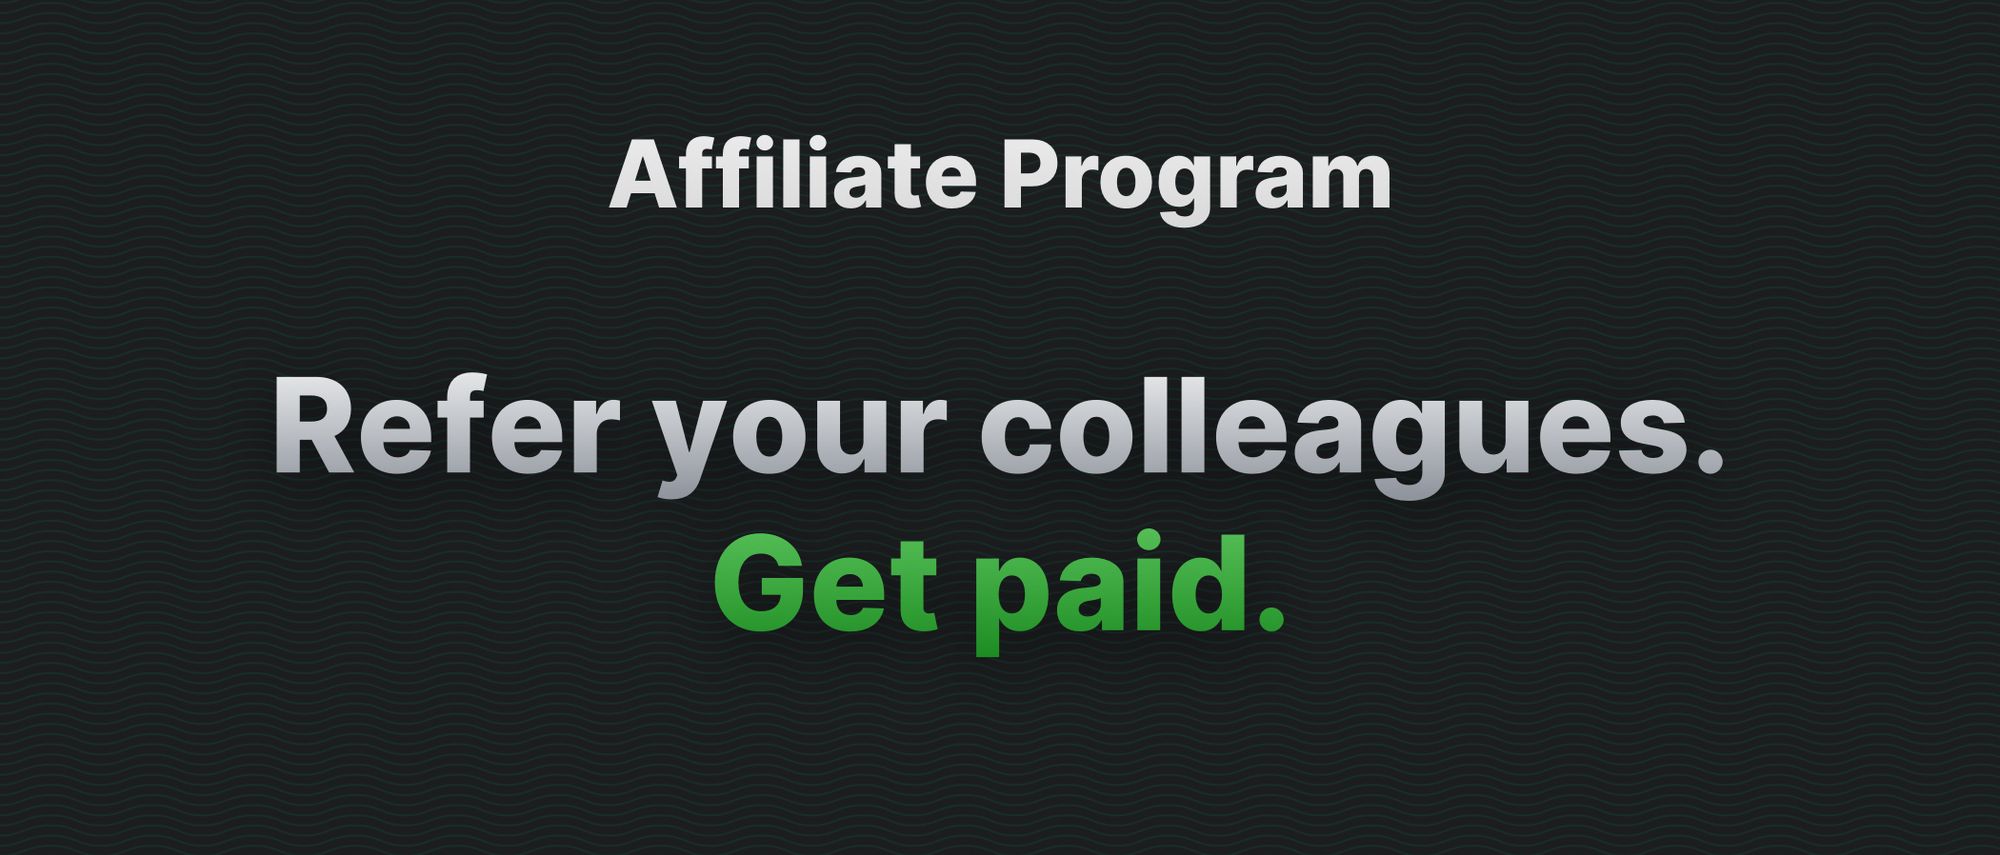 Introducing That Clean Life’s Affiliate Program: Get Paid for Sharing What You Already Love